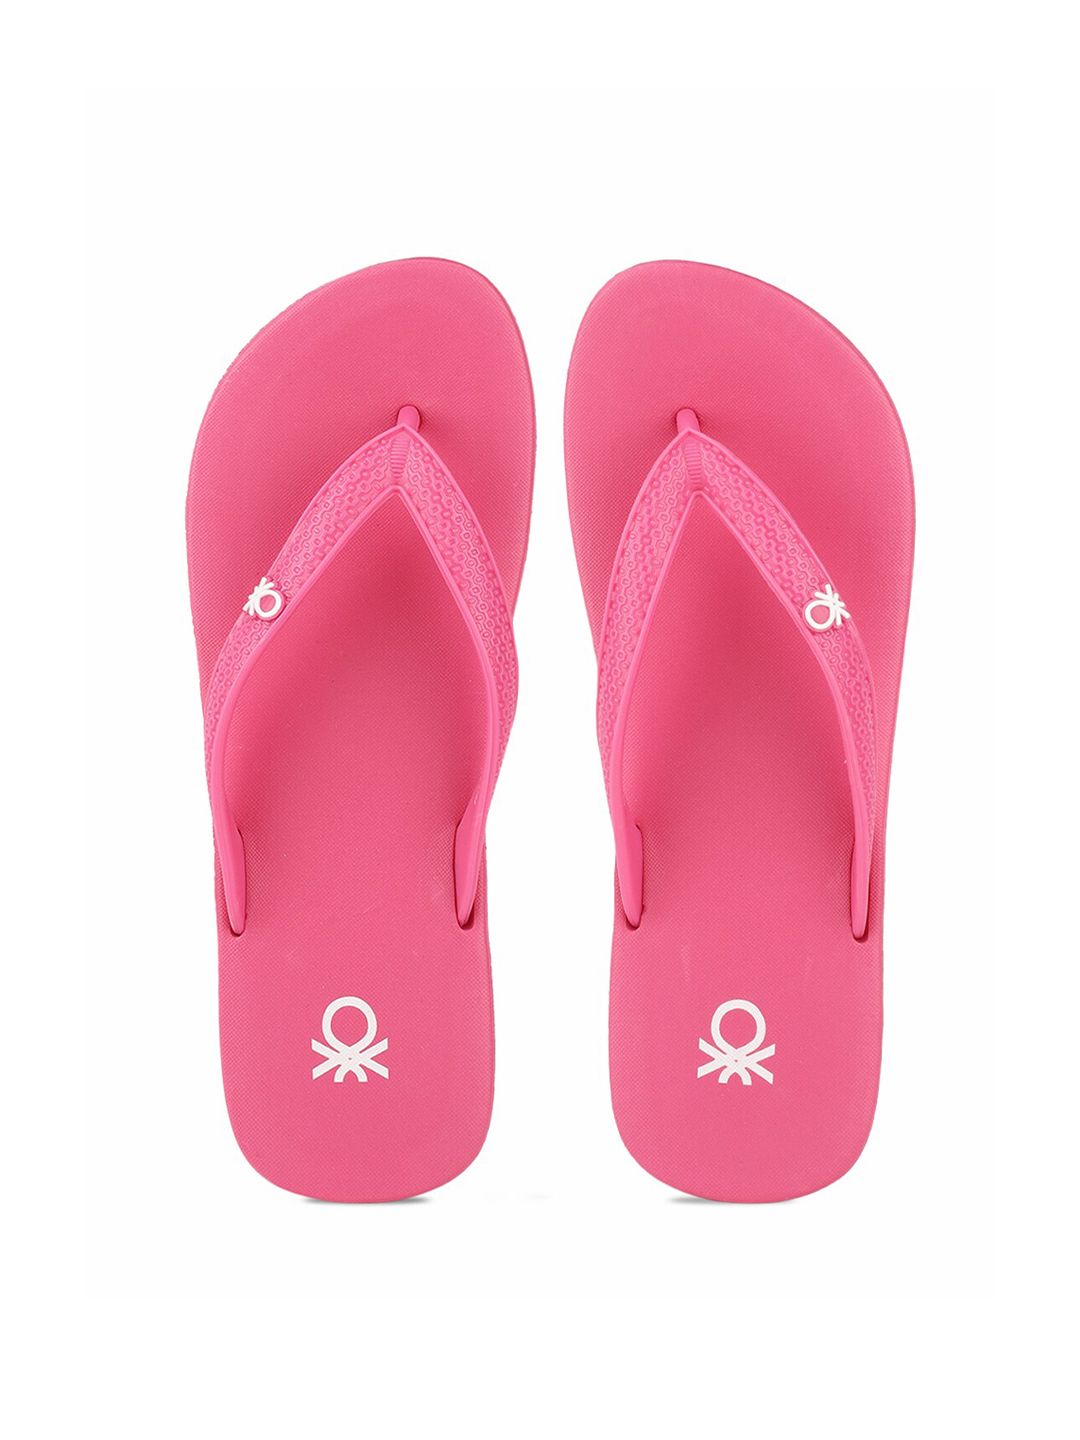 United Colors of Benetton Women Pink Printed Rubber Thong Flip-Flops Price in India